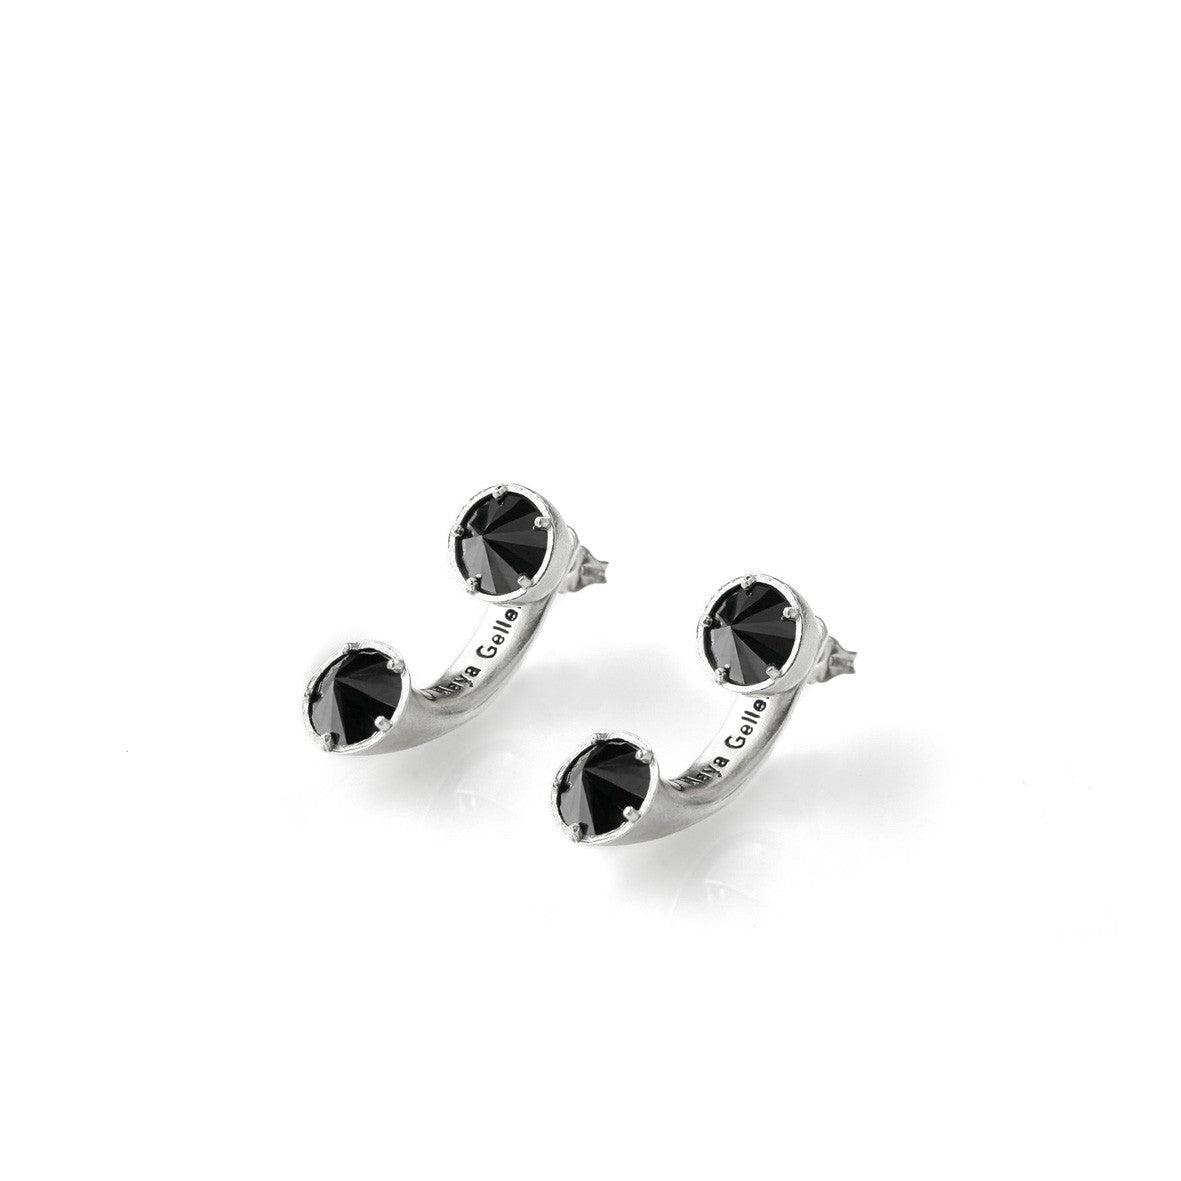 Silver "pierce" earring with black stones